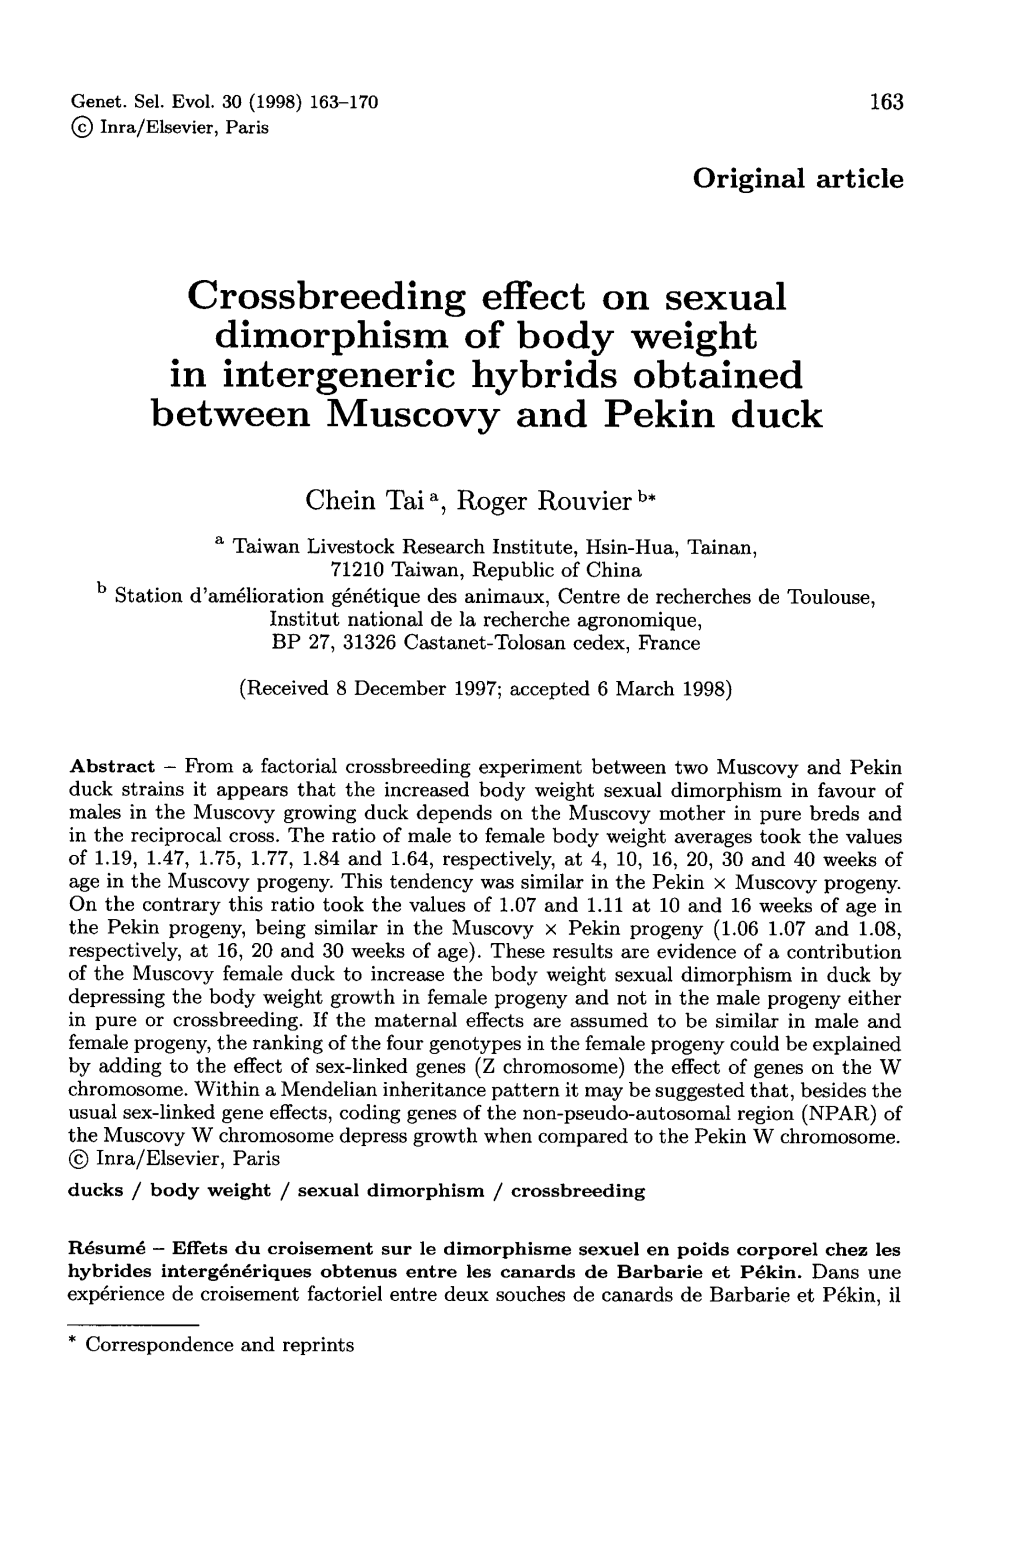 Crossbreeding Effect on Sexual Dimorphism of Body Weight in Intergeneric Hybrids Obtained Between Muscovy and Pekin Duck